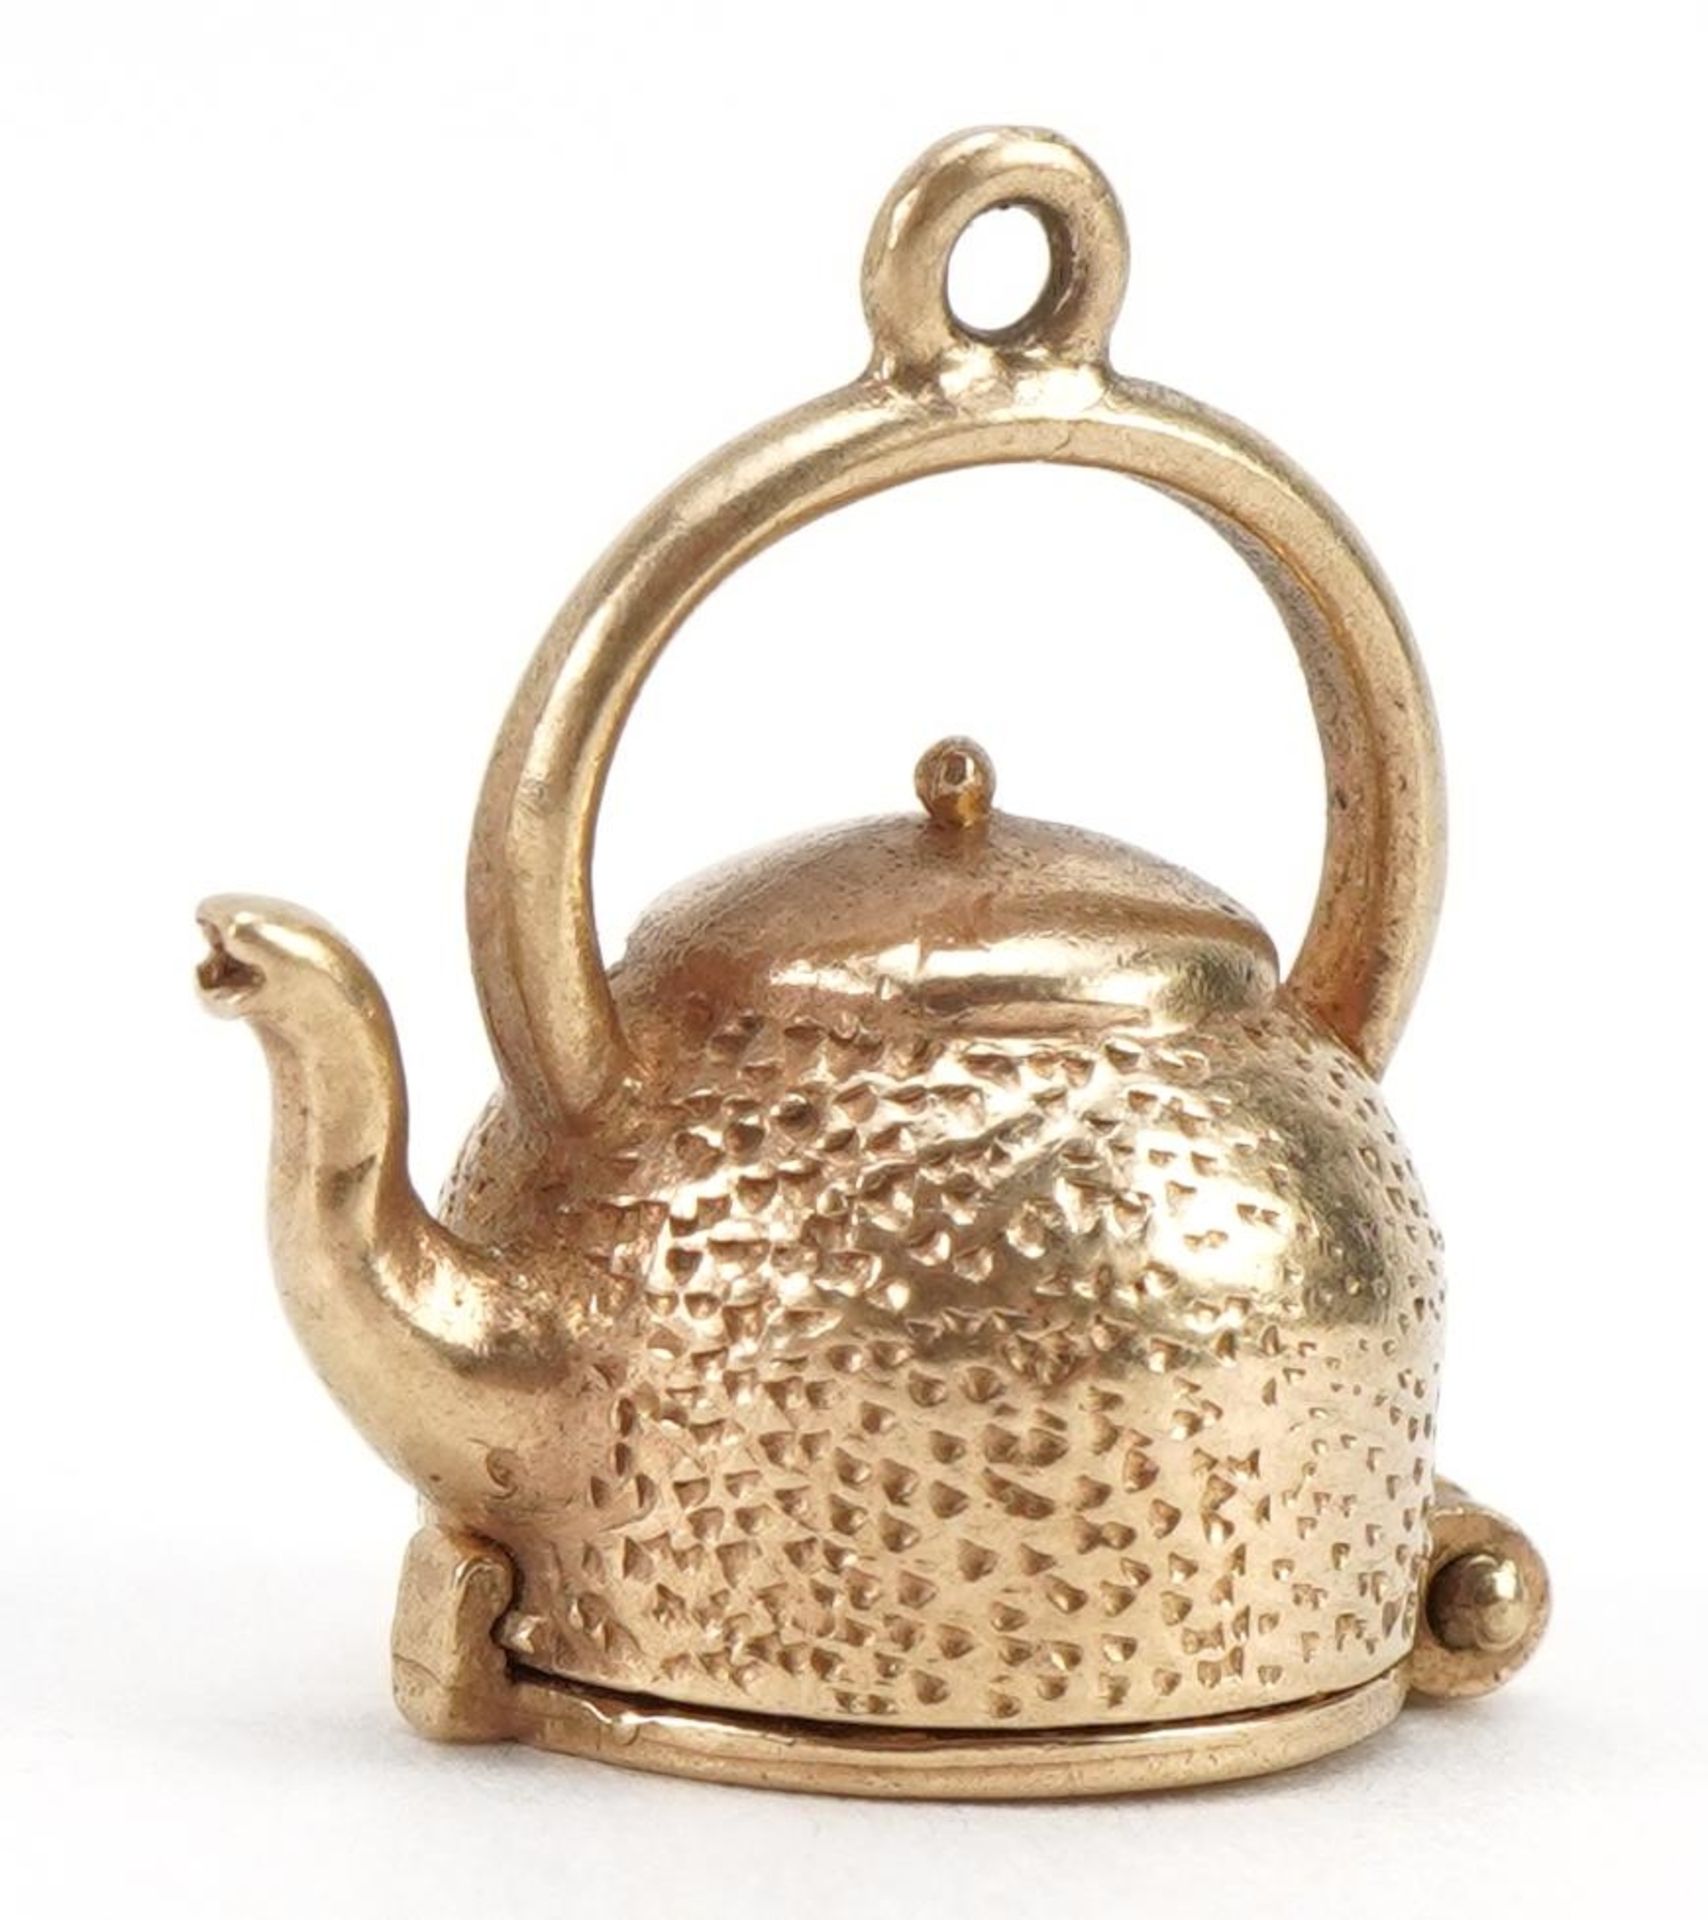 9ct gold kettle charm opening to reveal three fish, 1.8cm high, 3.8g : For further information on